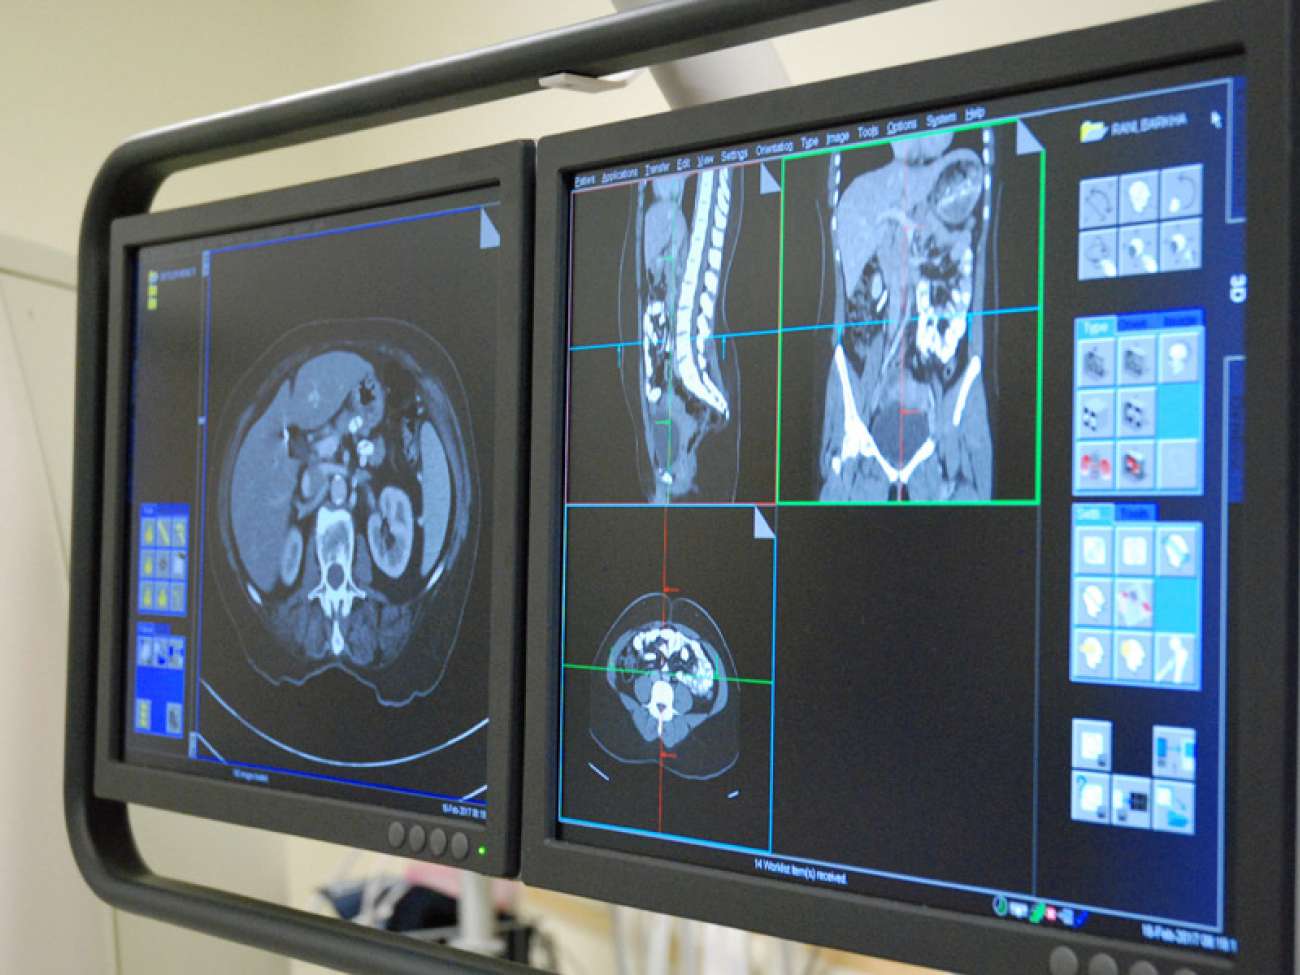 Close up images on the CT scanner's monitor